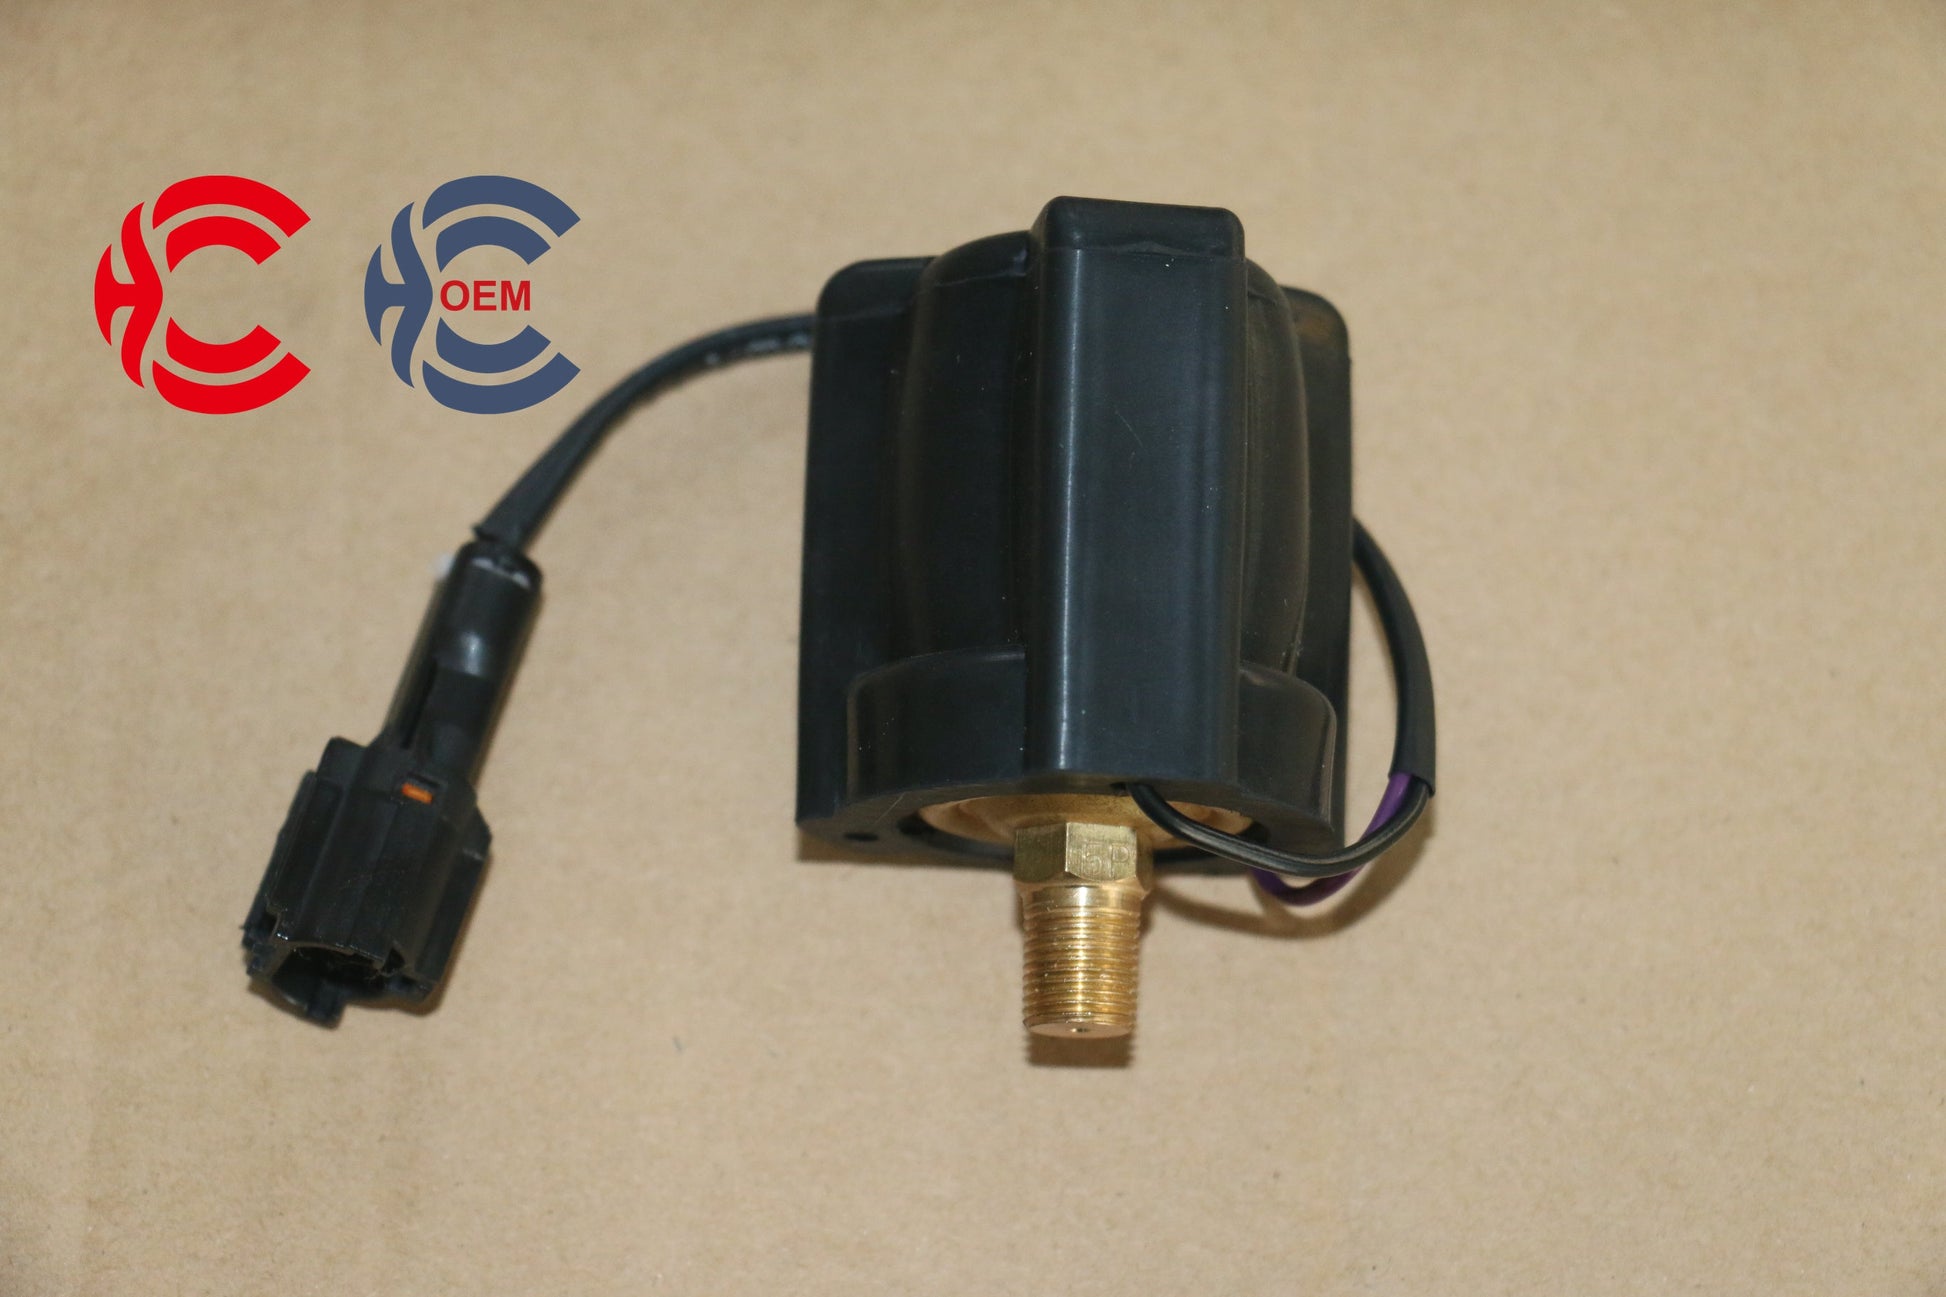 OEM: 0.05MPa Retarder Gas Pressure SwitchMaterial: ABS MetalColor: Black SilverOrigin: Made in ChinaWeight: 50gPacking List: 1* Gas Pressure Switch More ServiceWe can provide OEM Manufacturing serviceWe can Be your one-step solution for Auto PartsWe can provide technical scheme for you Feel Free to Contact Us, We will get back to you as soon as possible.